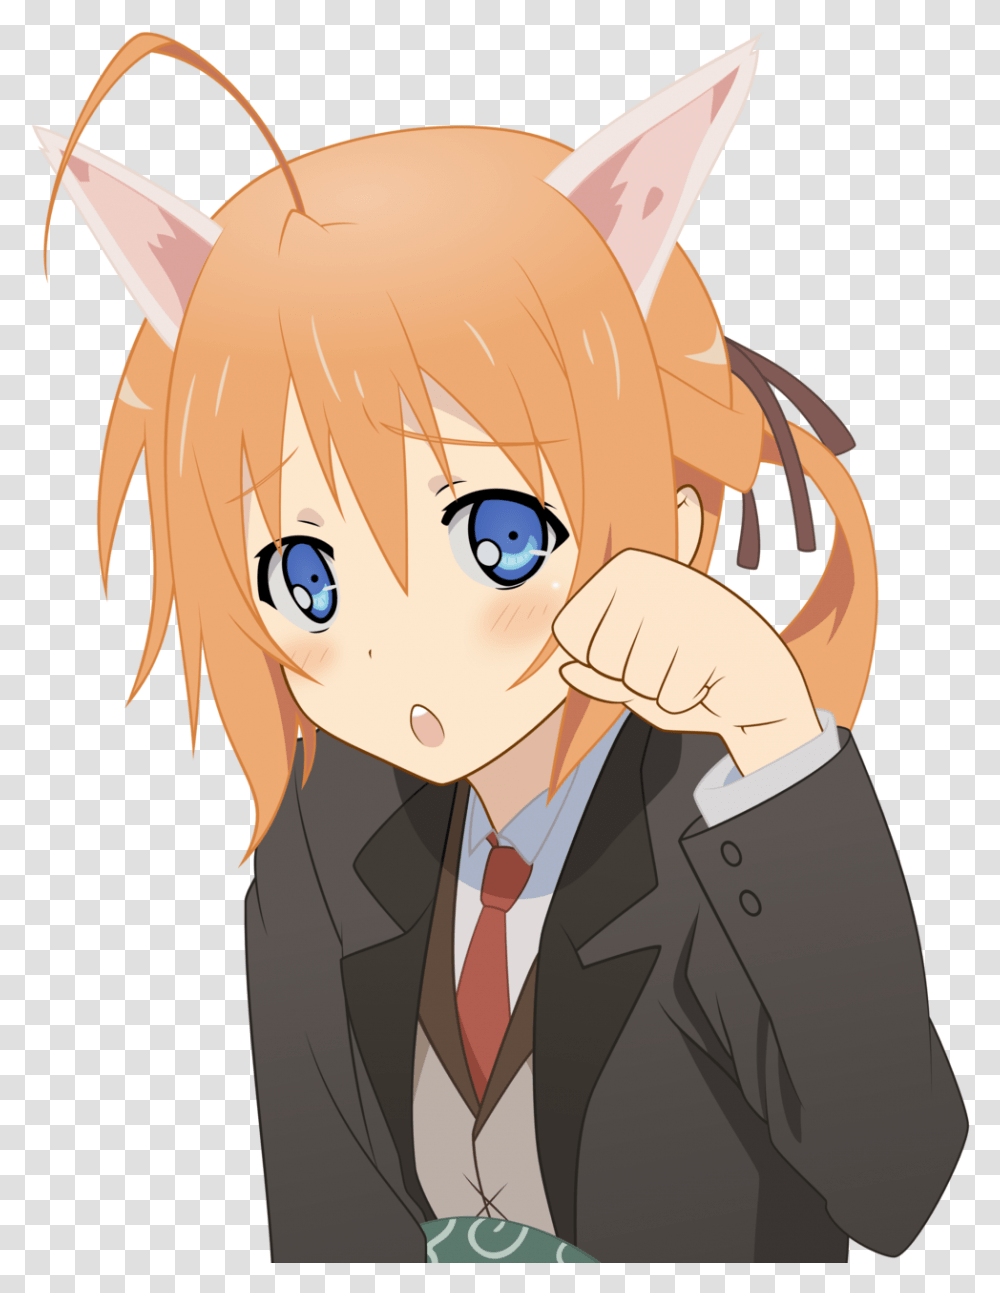 Tails Are Fine Wonky Cat Ears Are Fine Even Snakes, Comics, Book, Manga Transparent Png